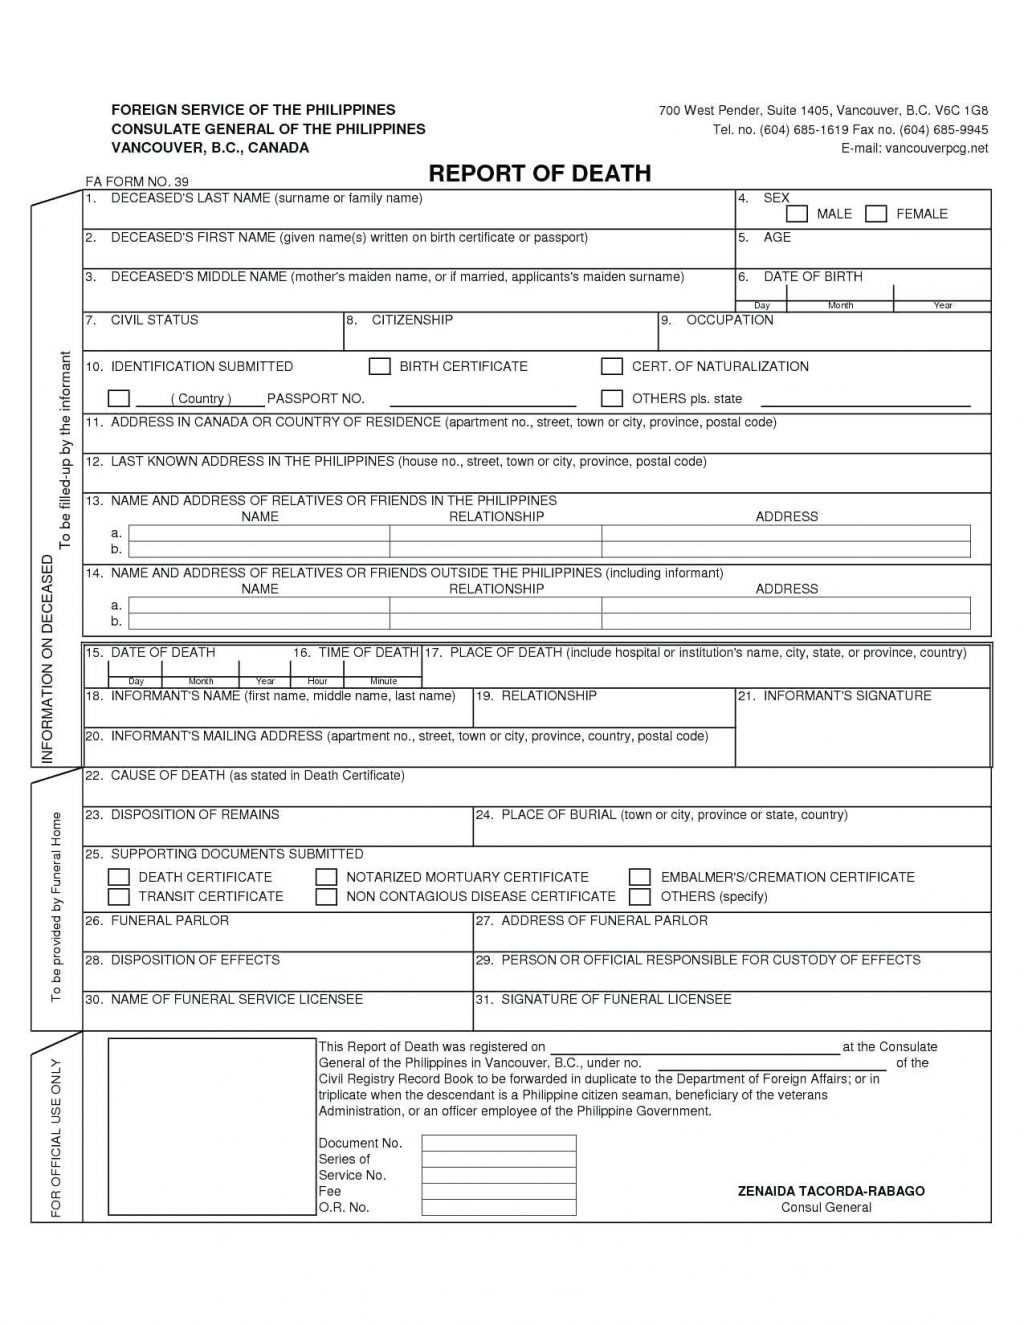 Death Certificate Translation Template Spanish To English Intended For Spanish To English Birth Certificate Translation Template